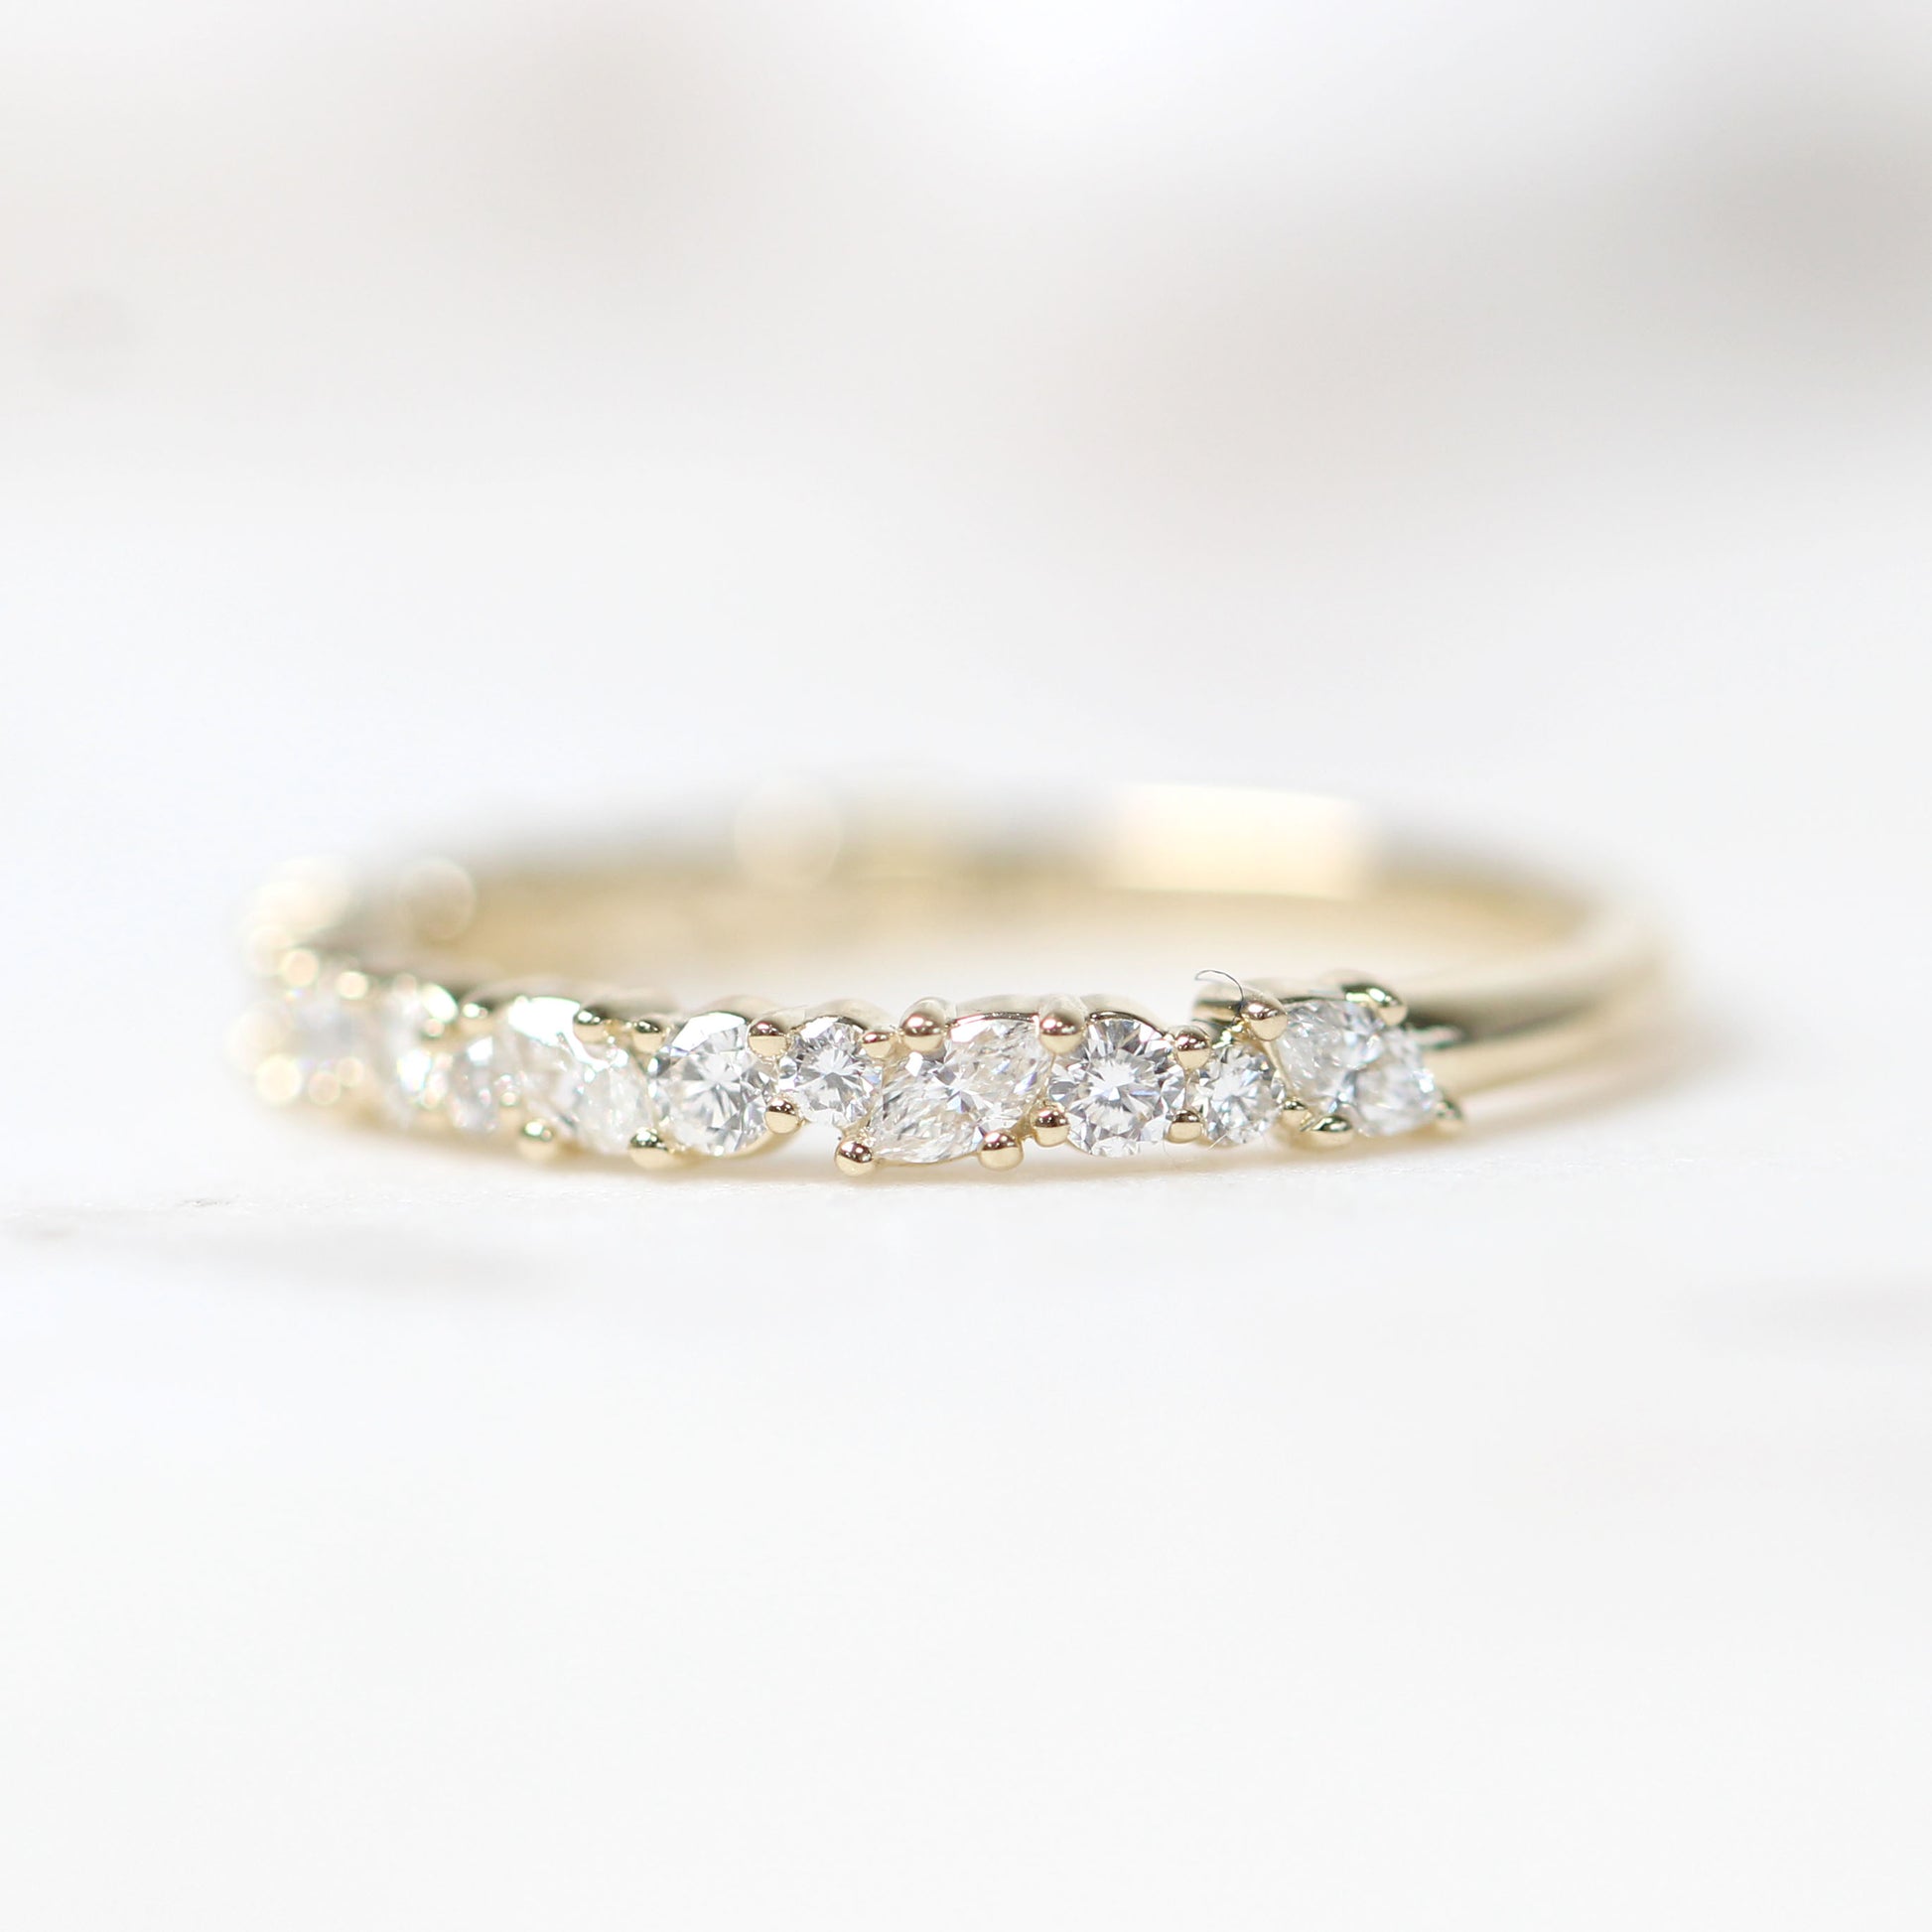 Grayson Diamond Cluster Wedding Stacking Anniversary Band - Midwinter Co. Alternative Bridal Rings and Modern Fine Jewelry